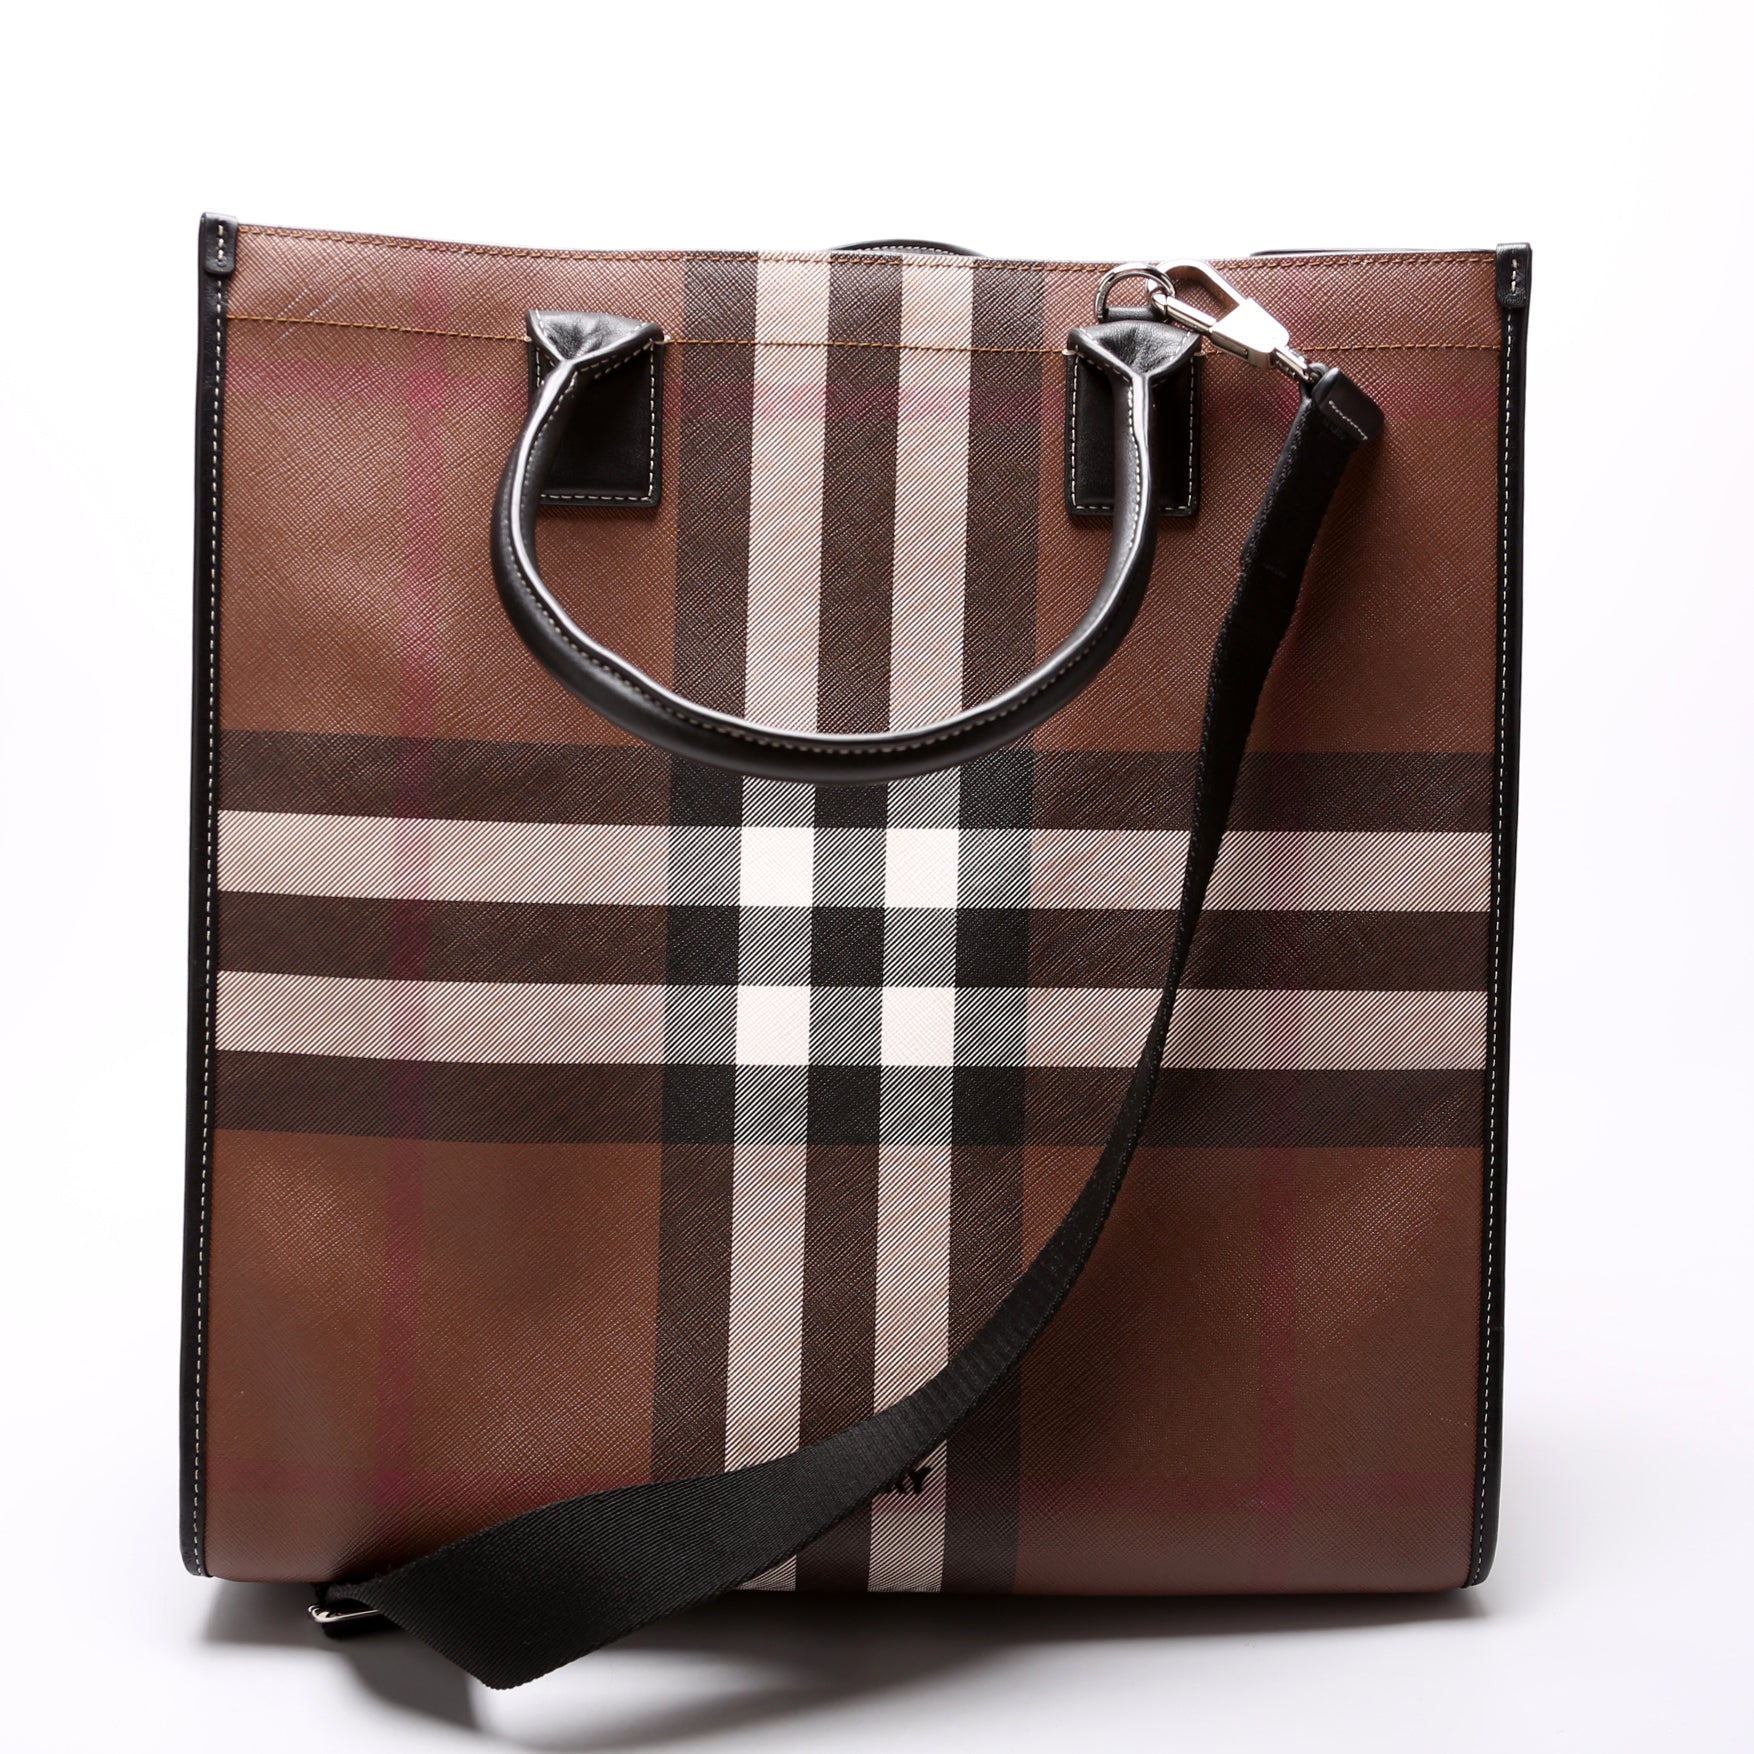 Burberry Brown Leather Tote Bag